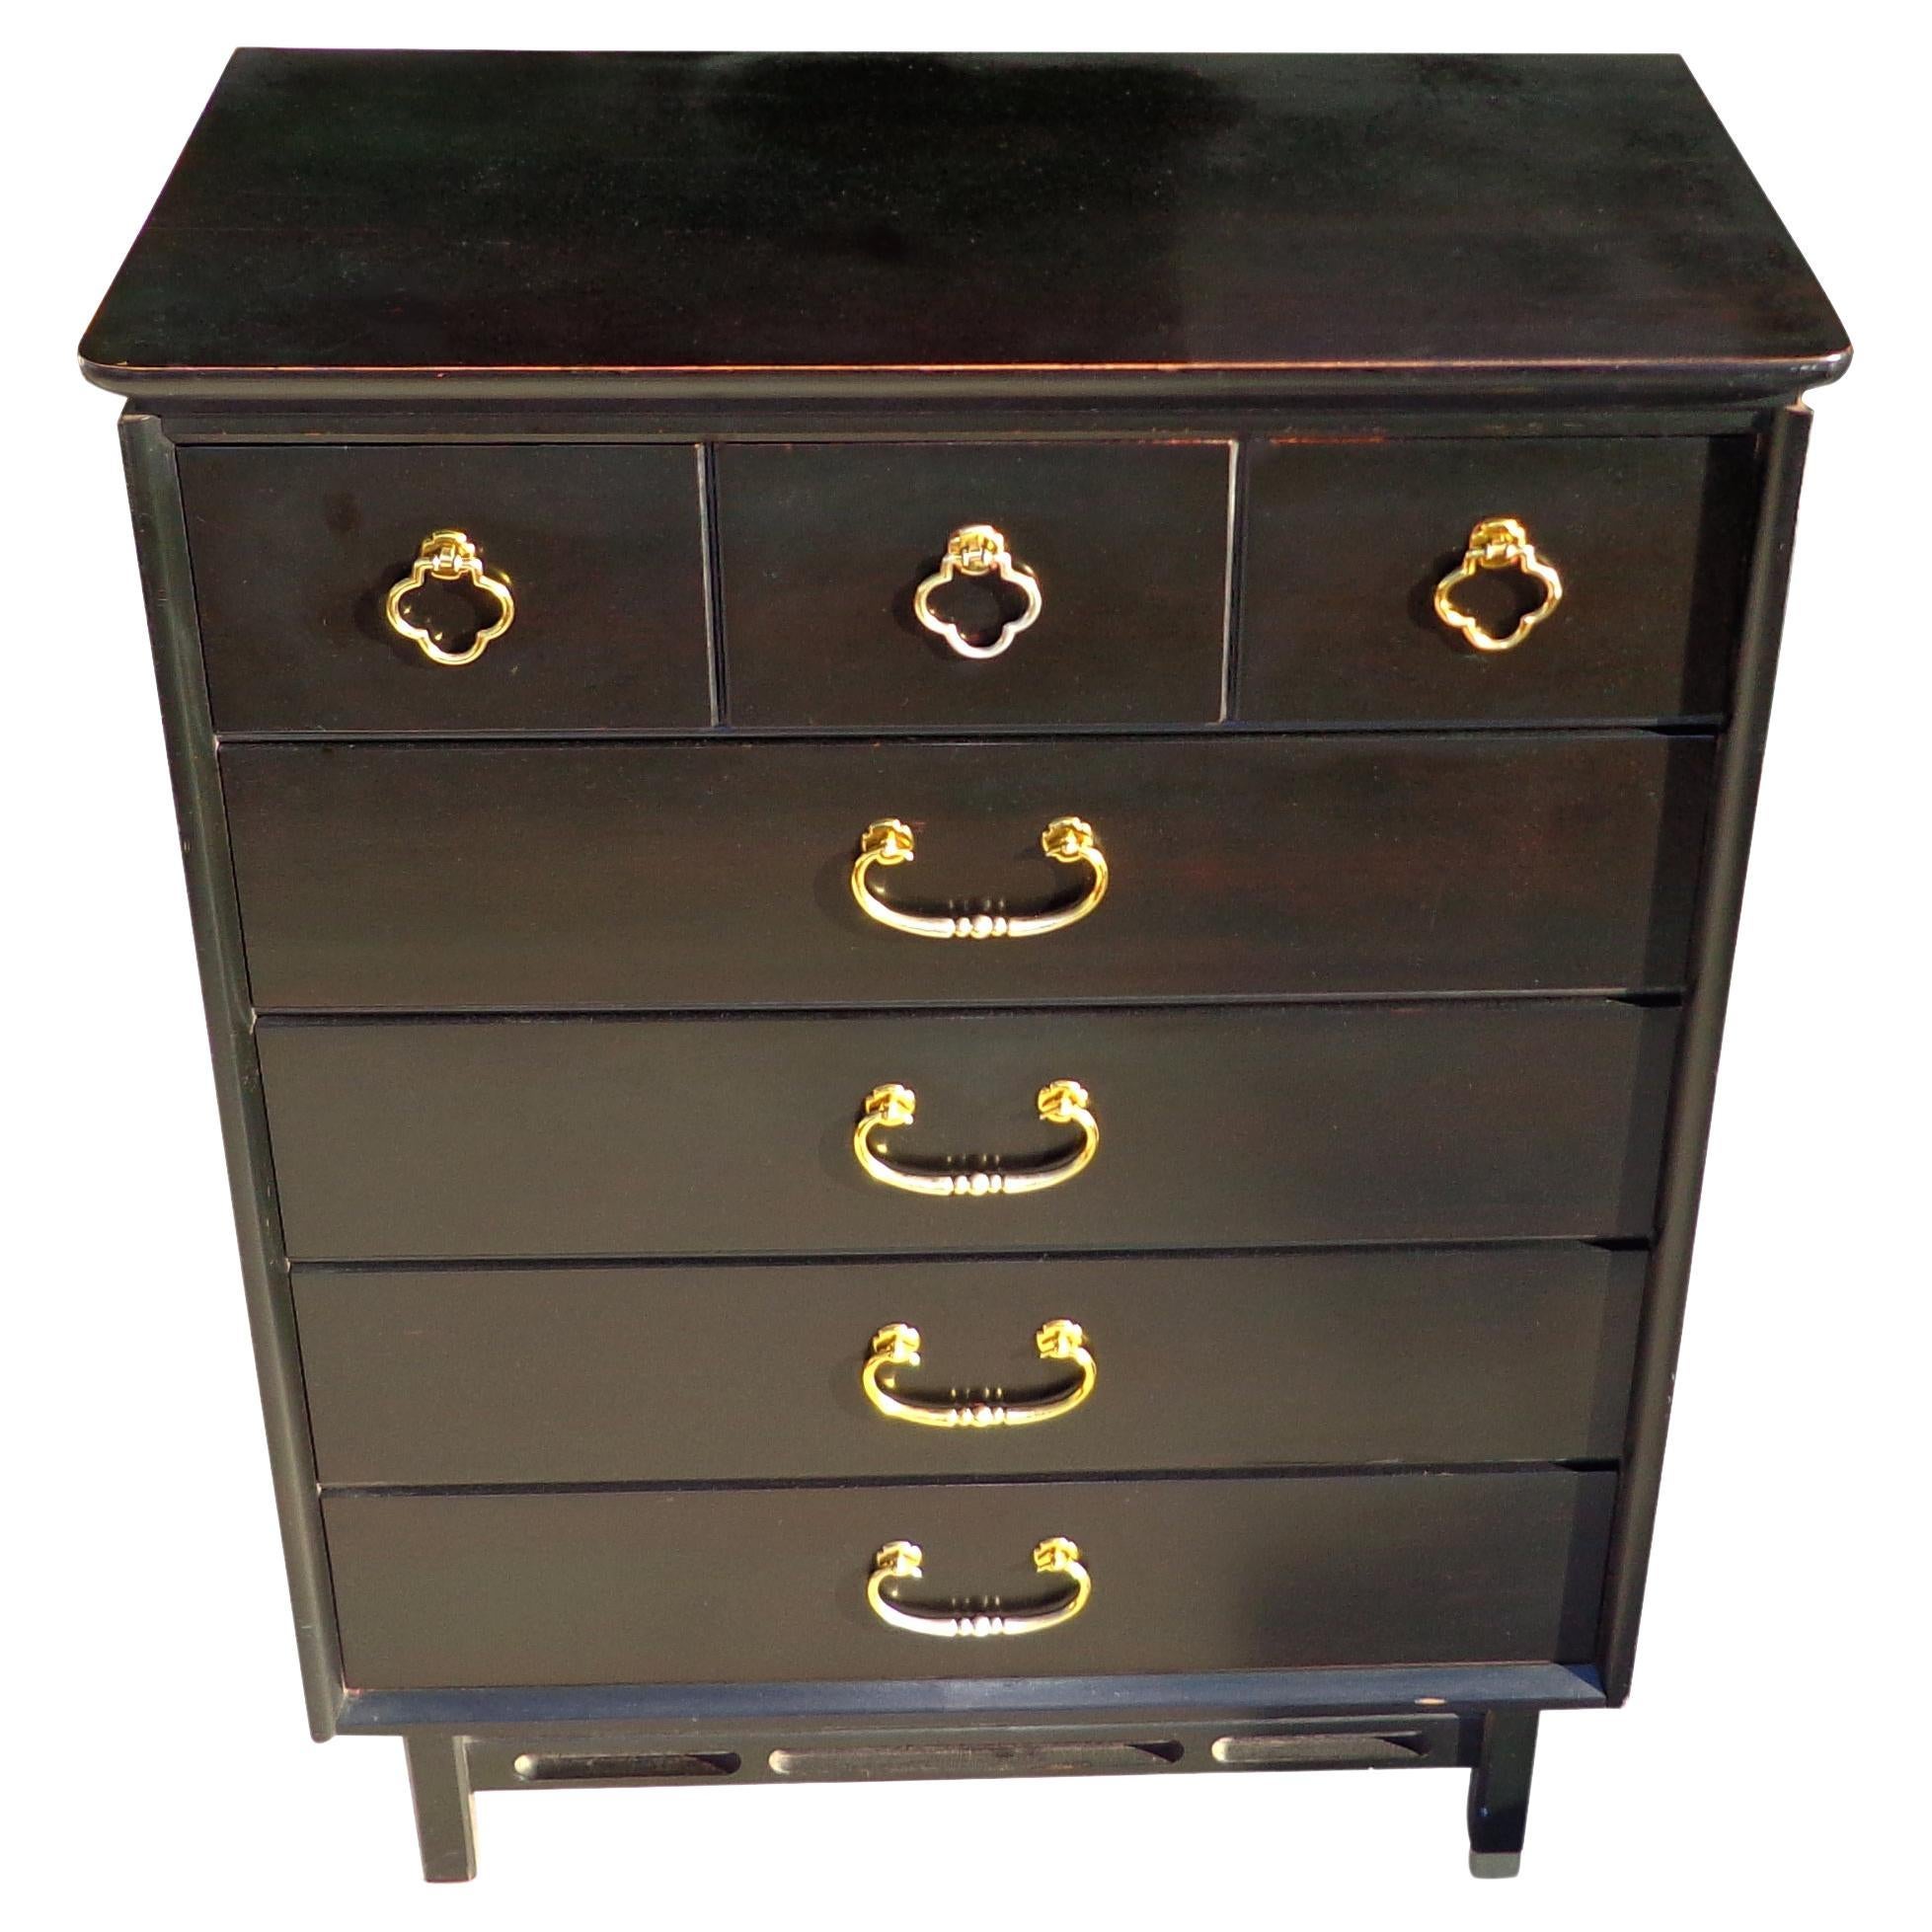 Chin Hua Hollywood Regency Ebonized Dresser by Bassett

Hollywood Regency dresser or credenza in an ebony lacquer finish. Features five large storage drawers with brass finished pulls.

See complimentary dresser available in last photo.